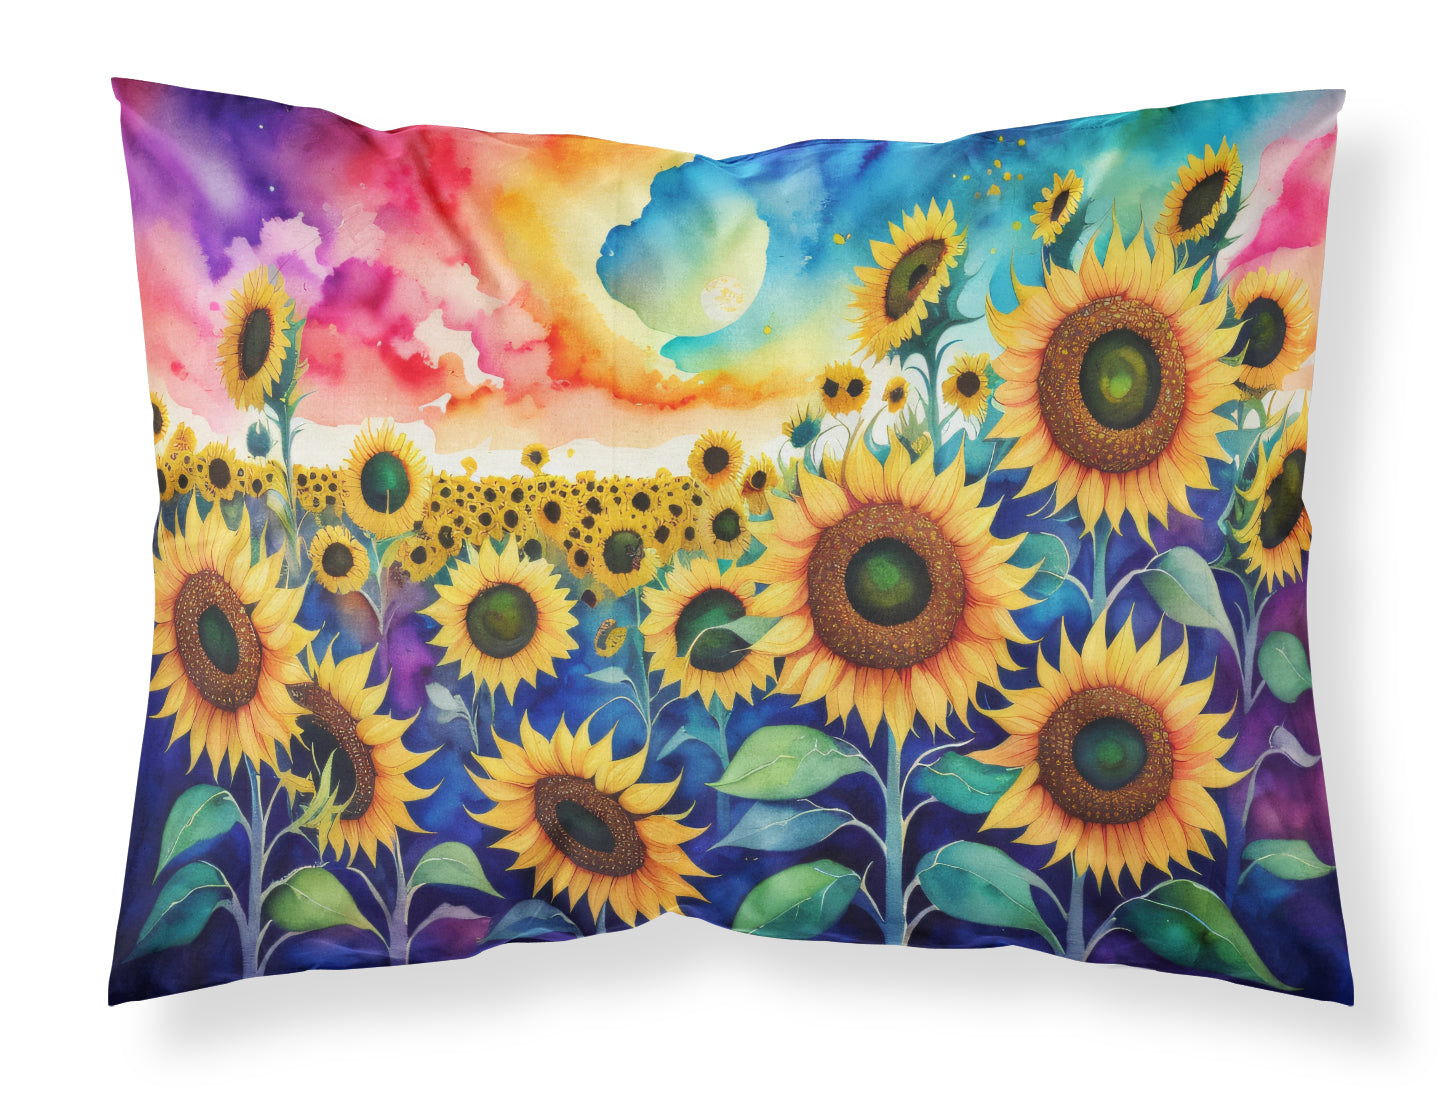 Buy this Sunflowers in Color Fabric Standard Pillowcase